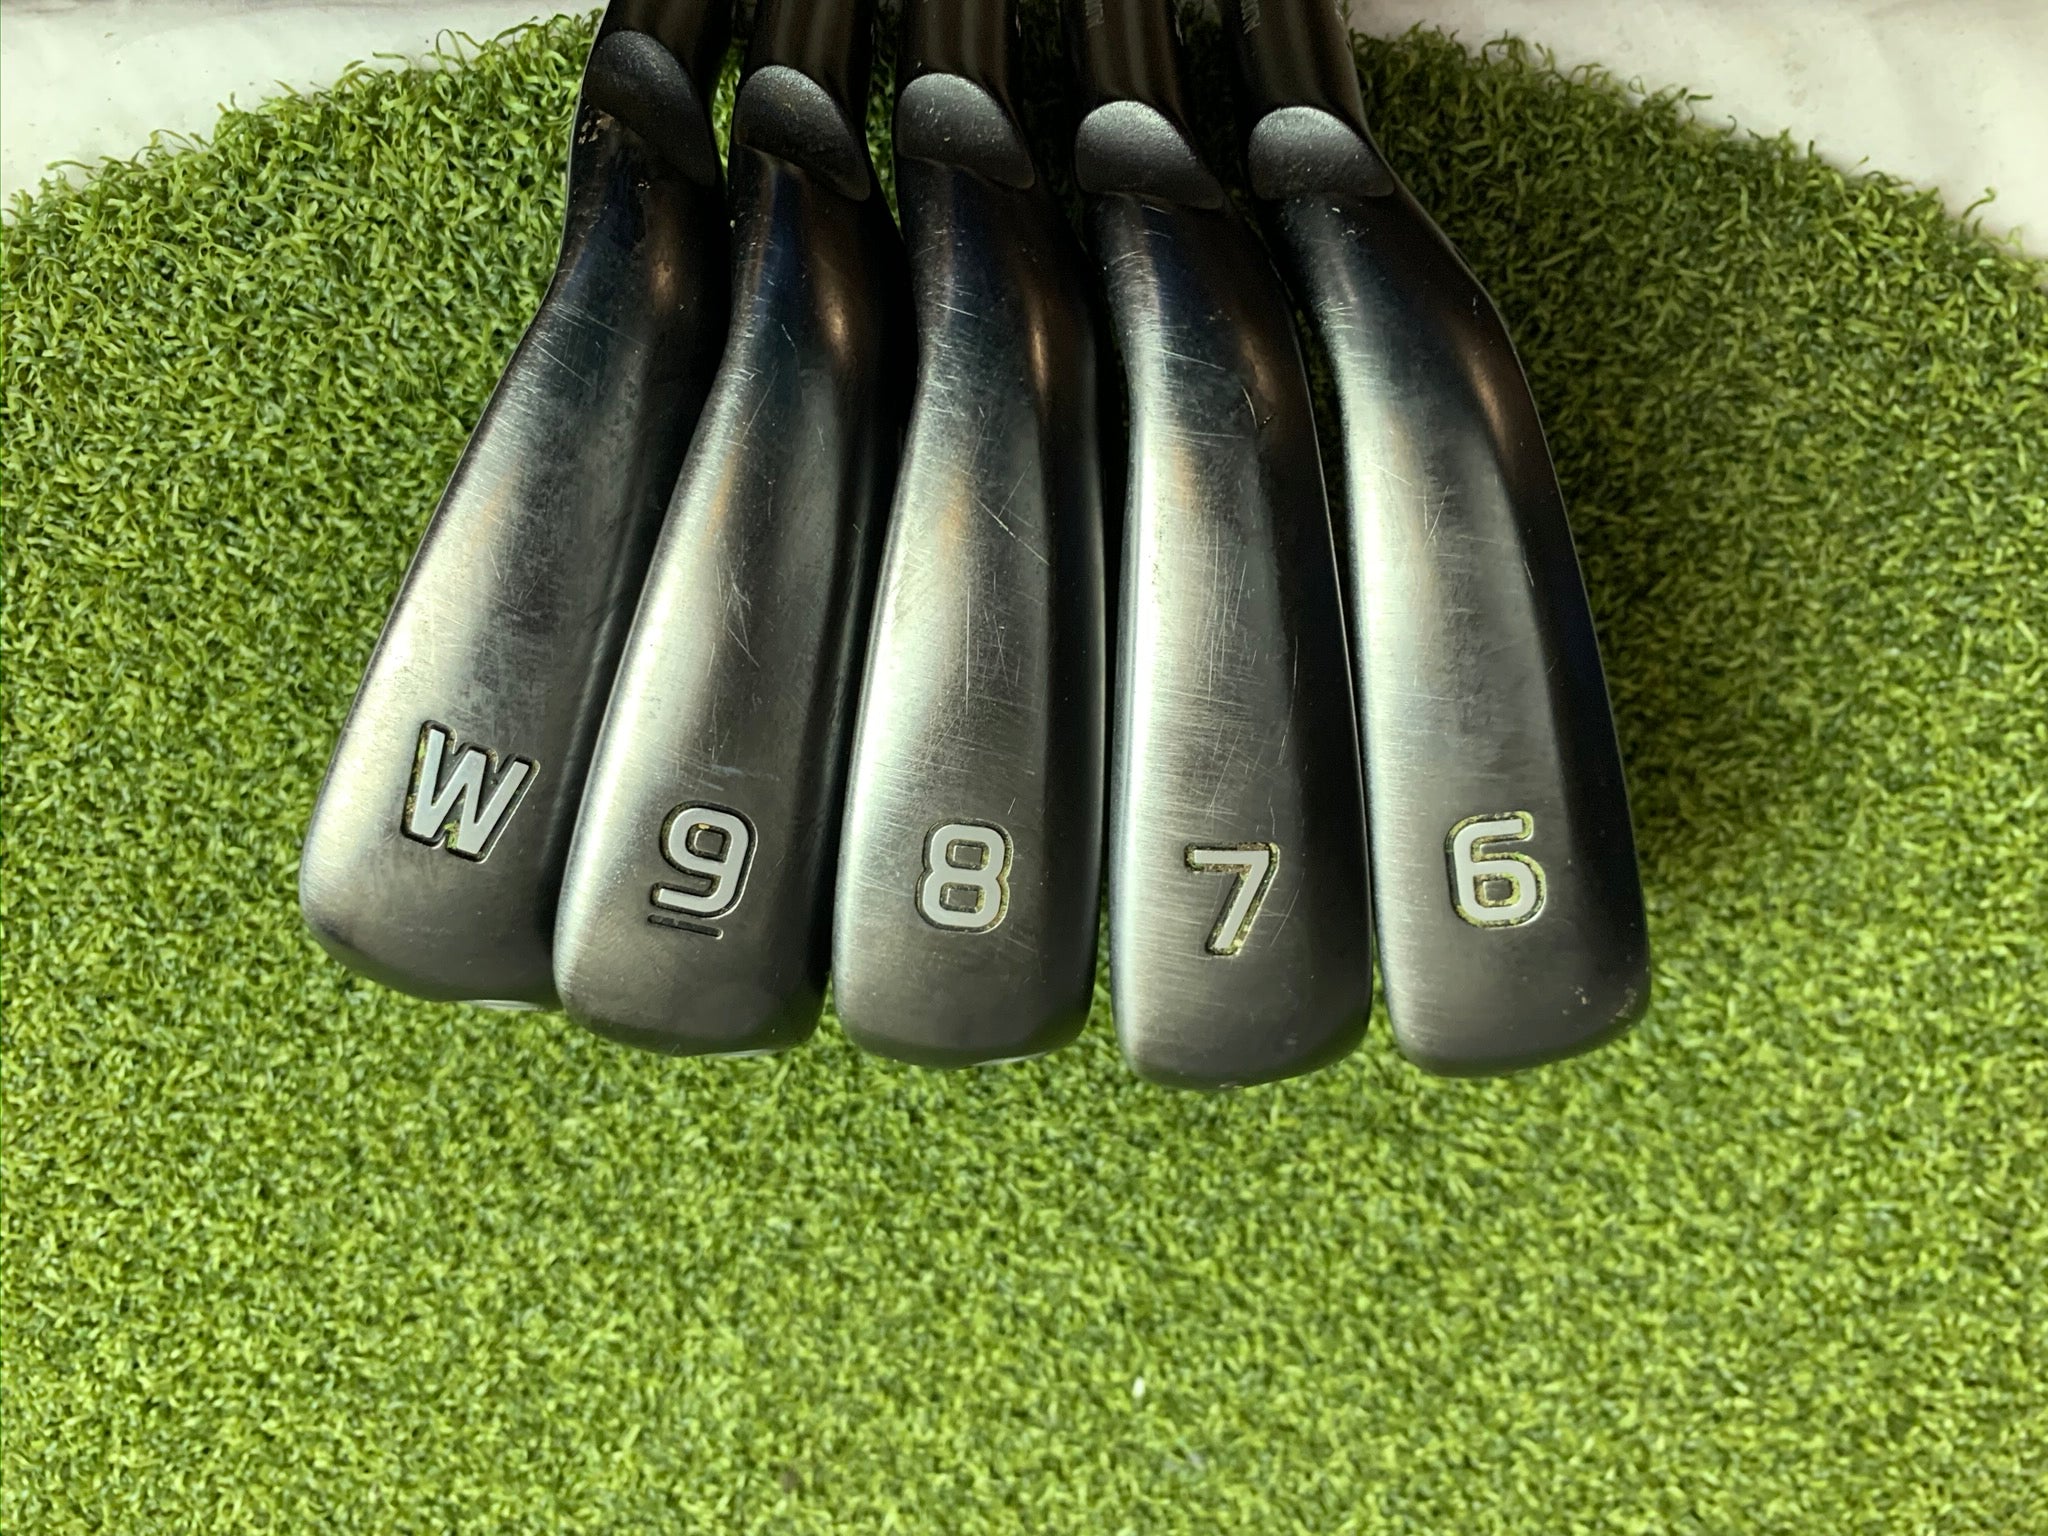 PING G710 6,7,8,9,W N.S.PRO 950GH neo-